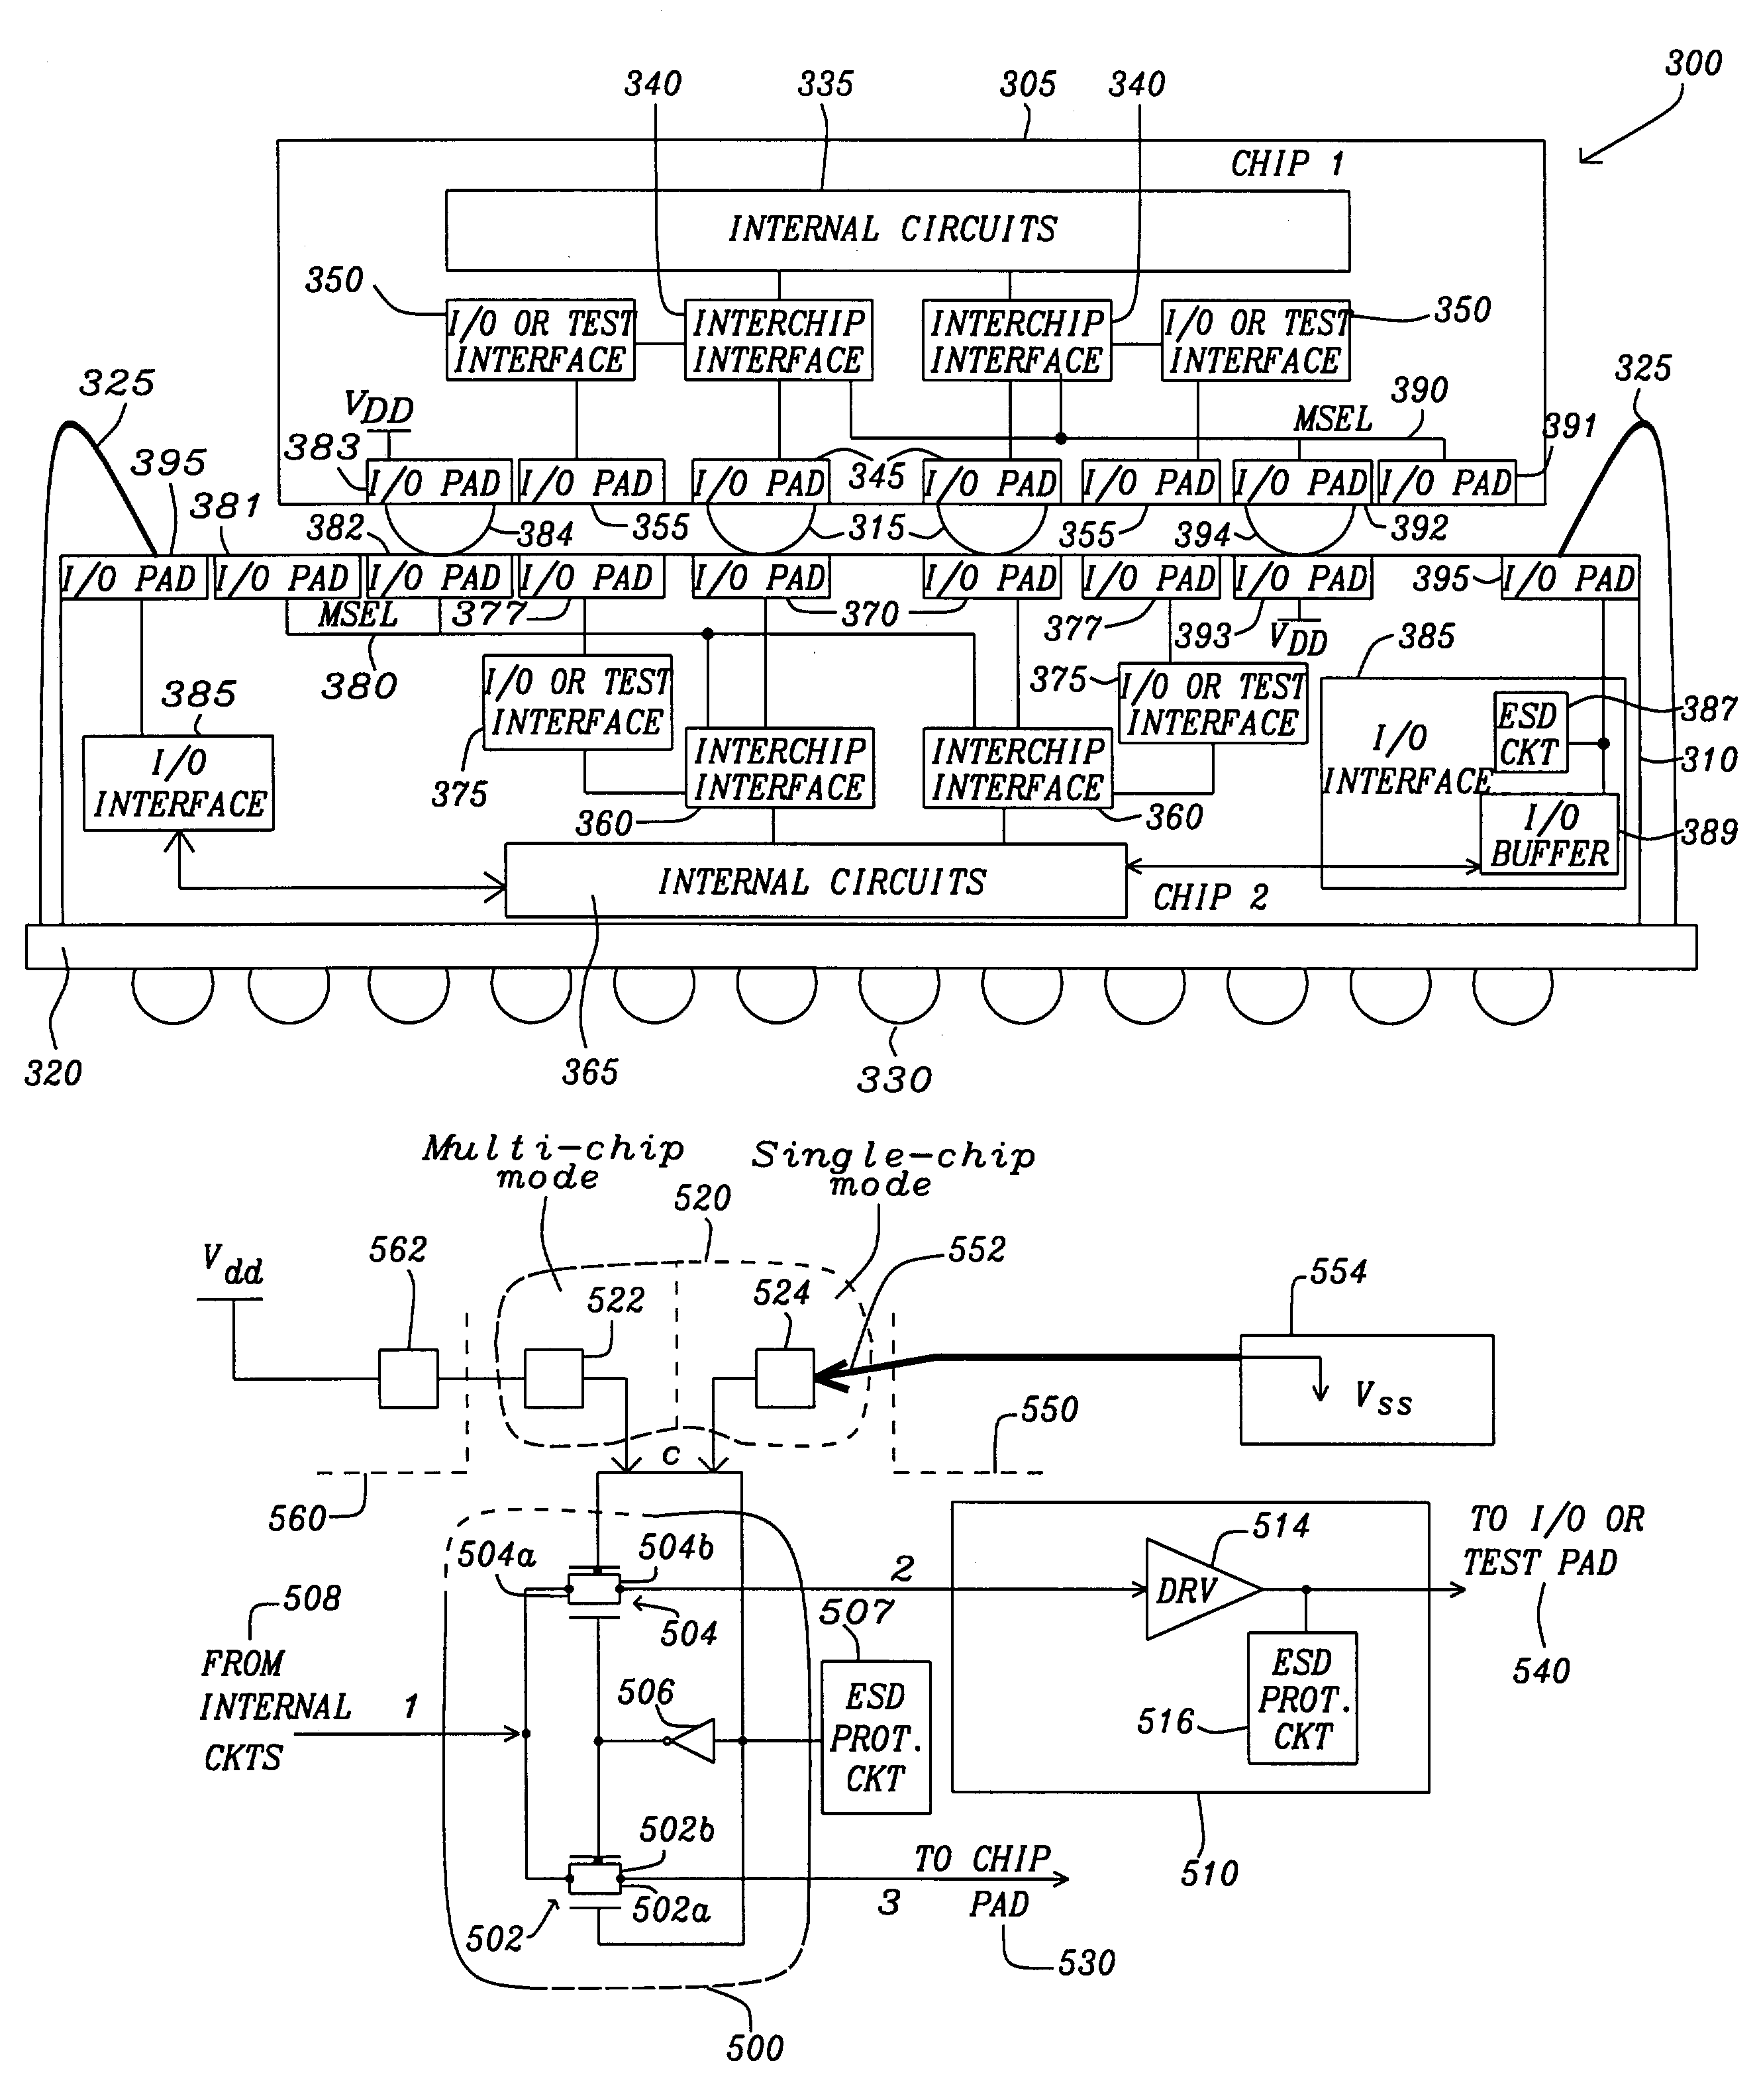 High performance sub-system design and assembly